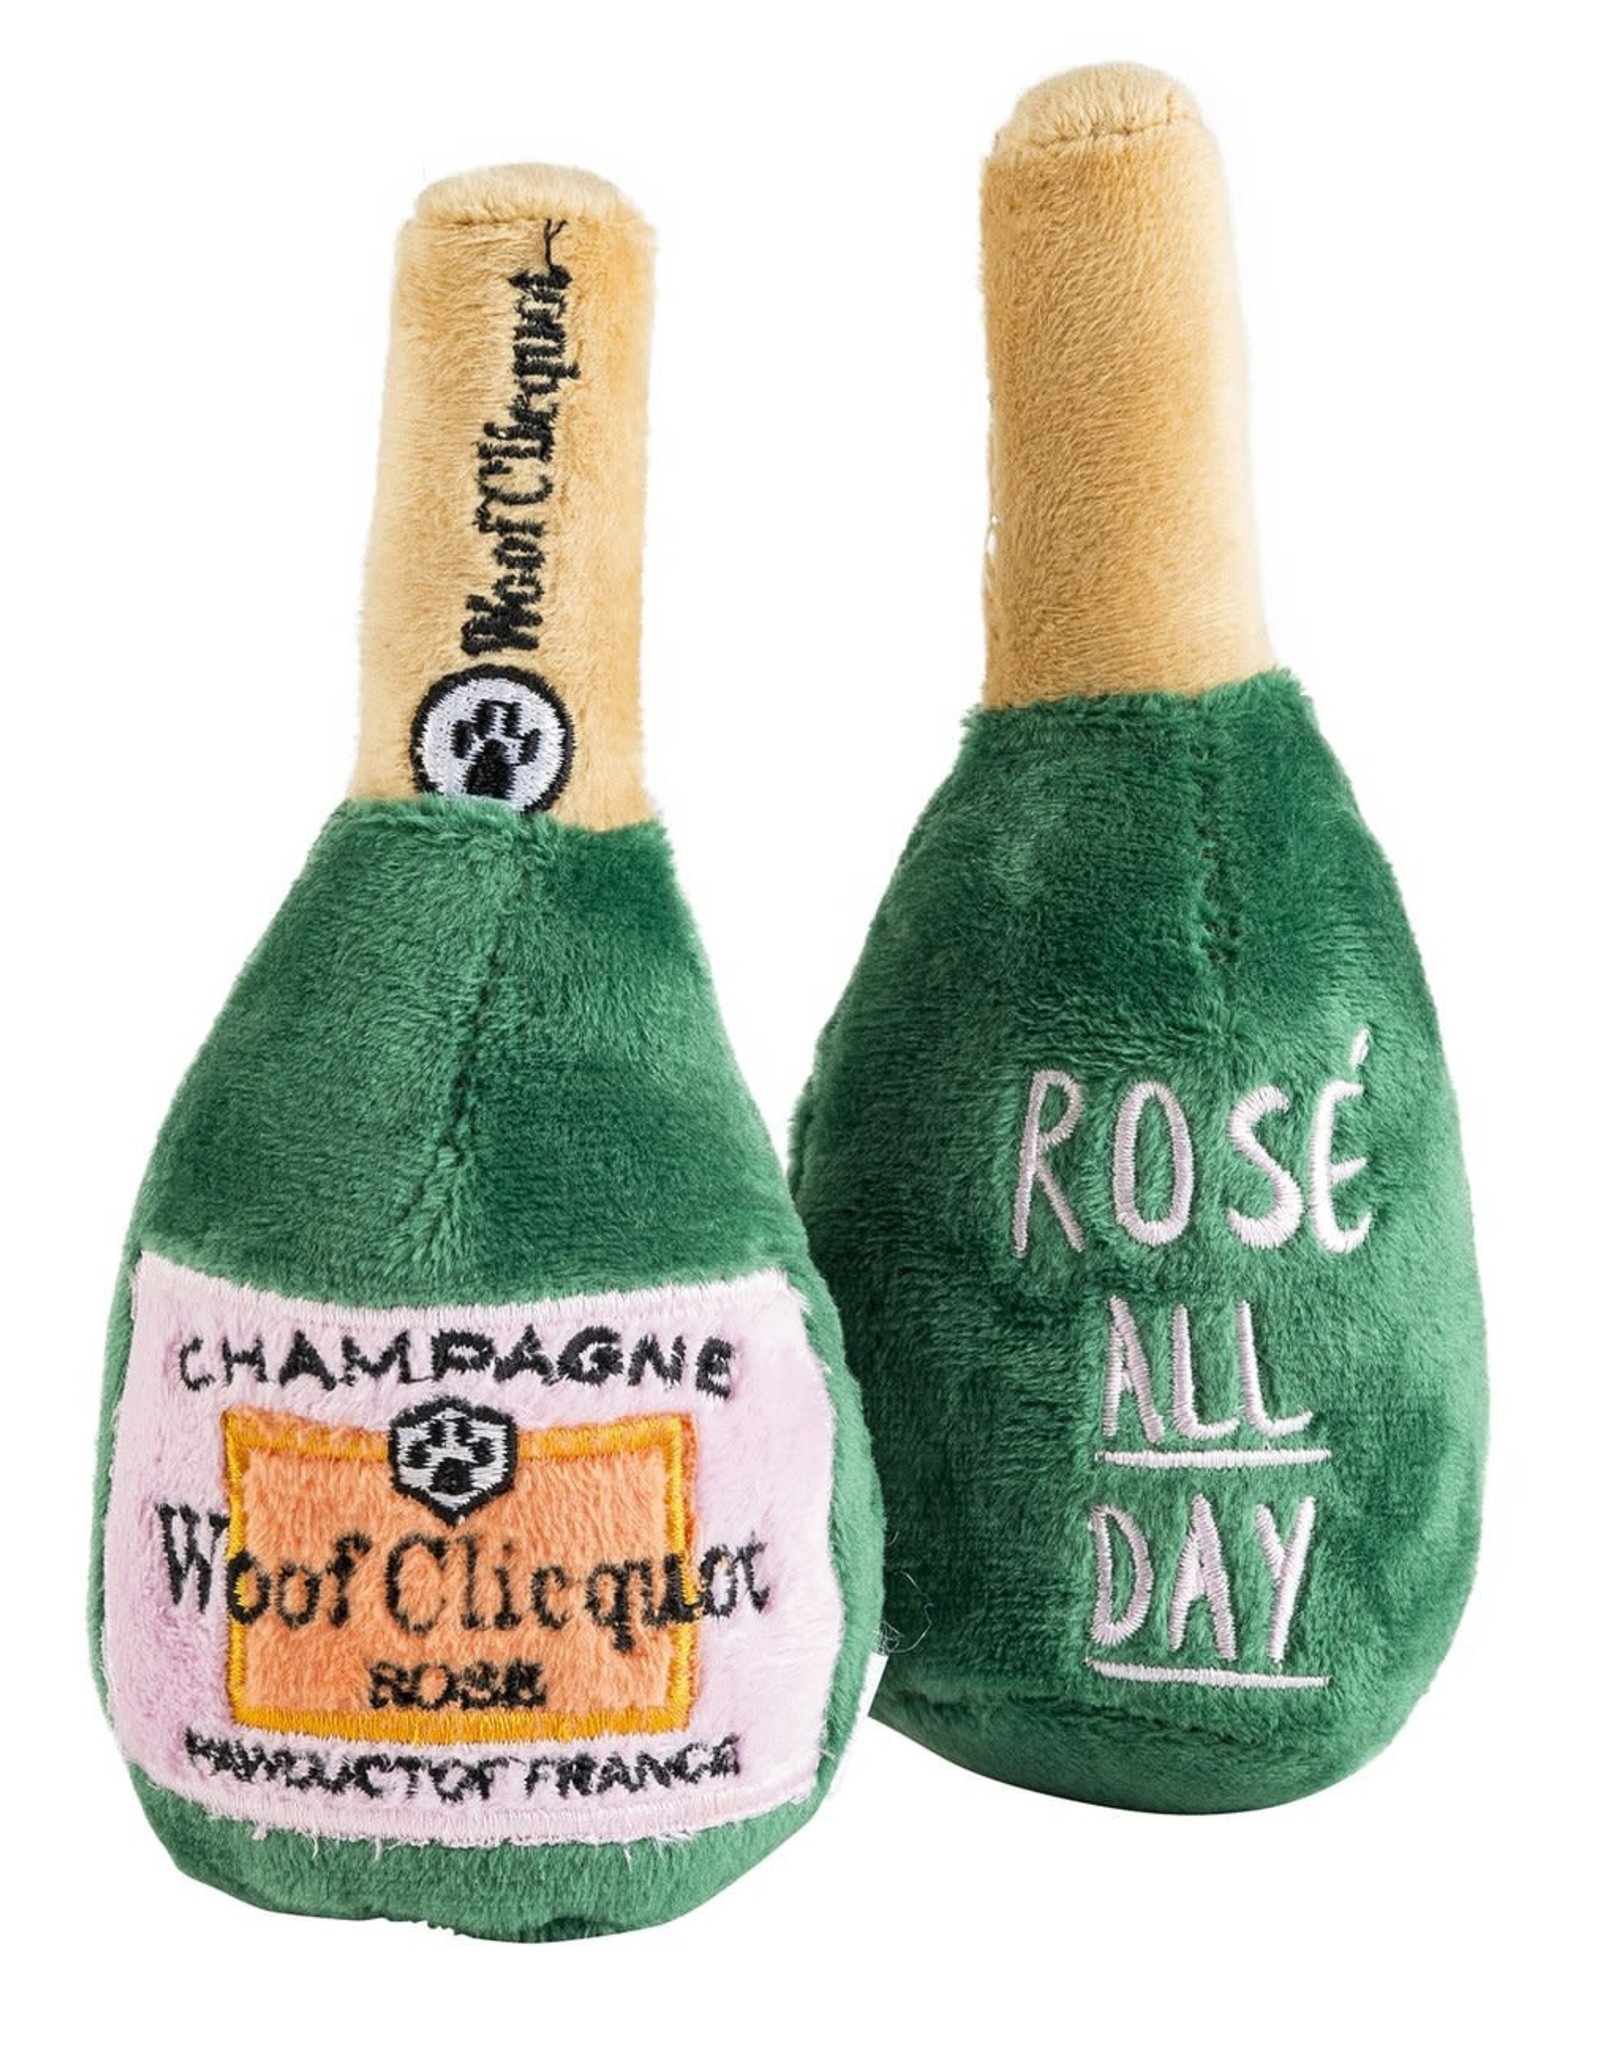 Haute Diggity Dog Woof Clicquot Rose Champagne Dog Toy